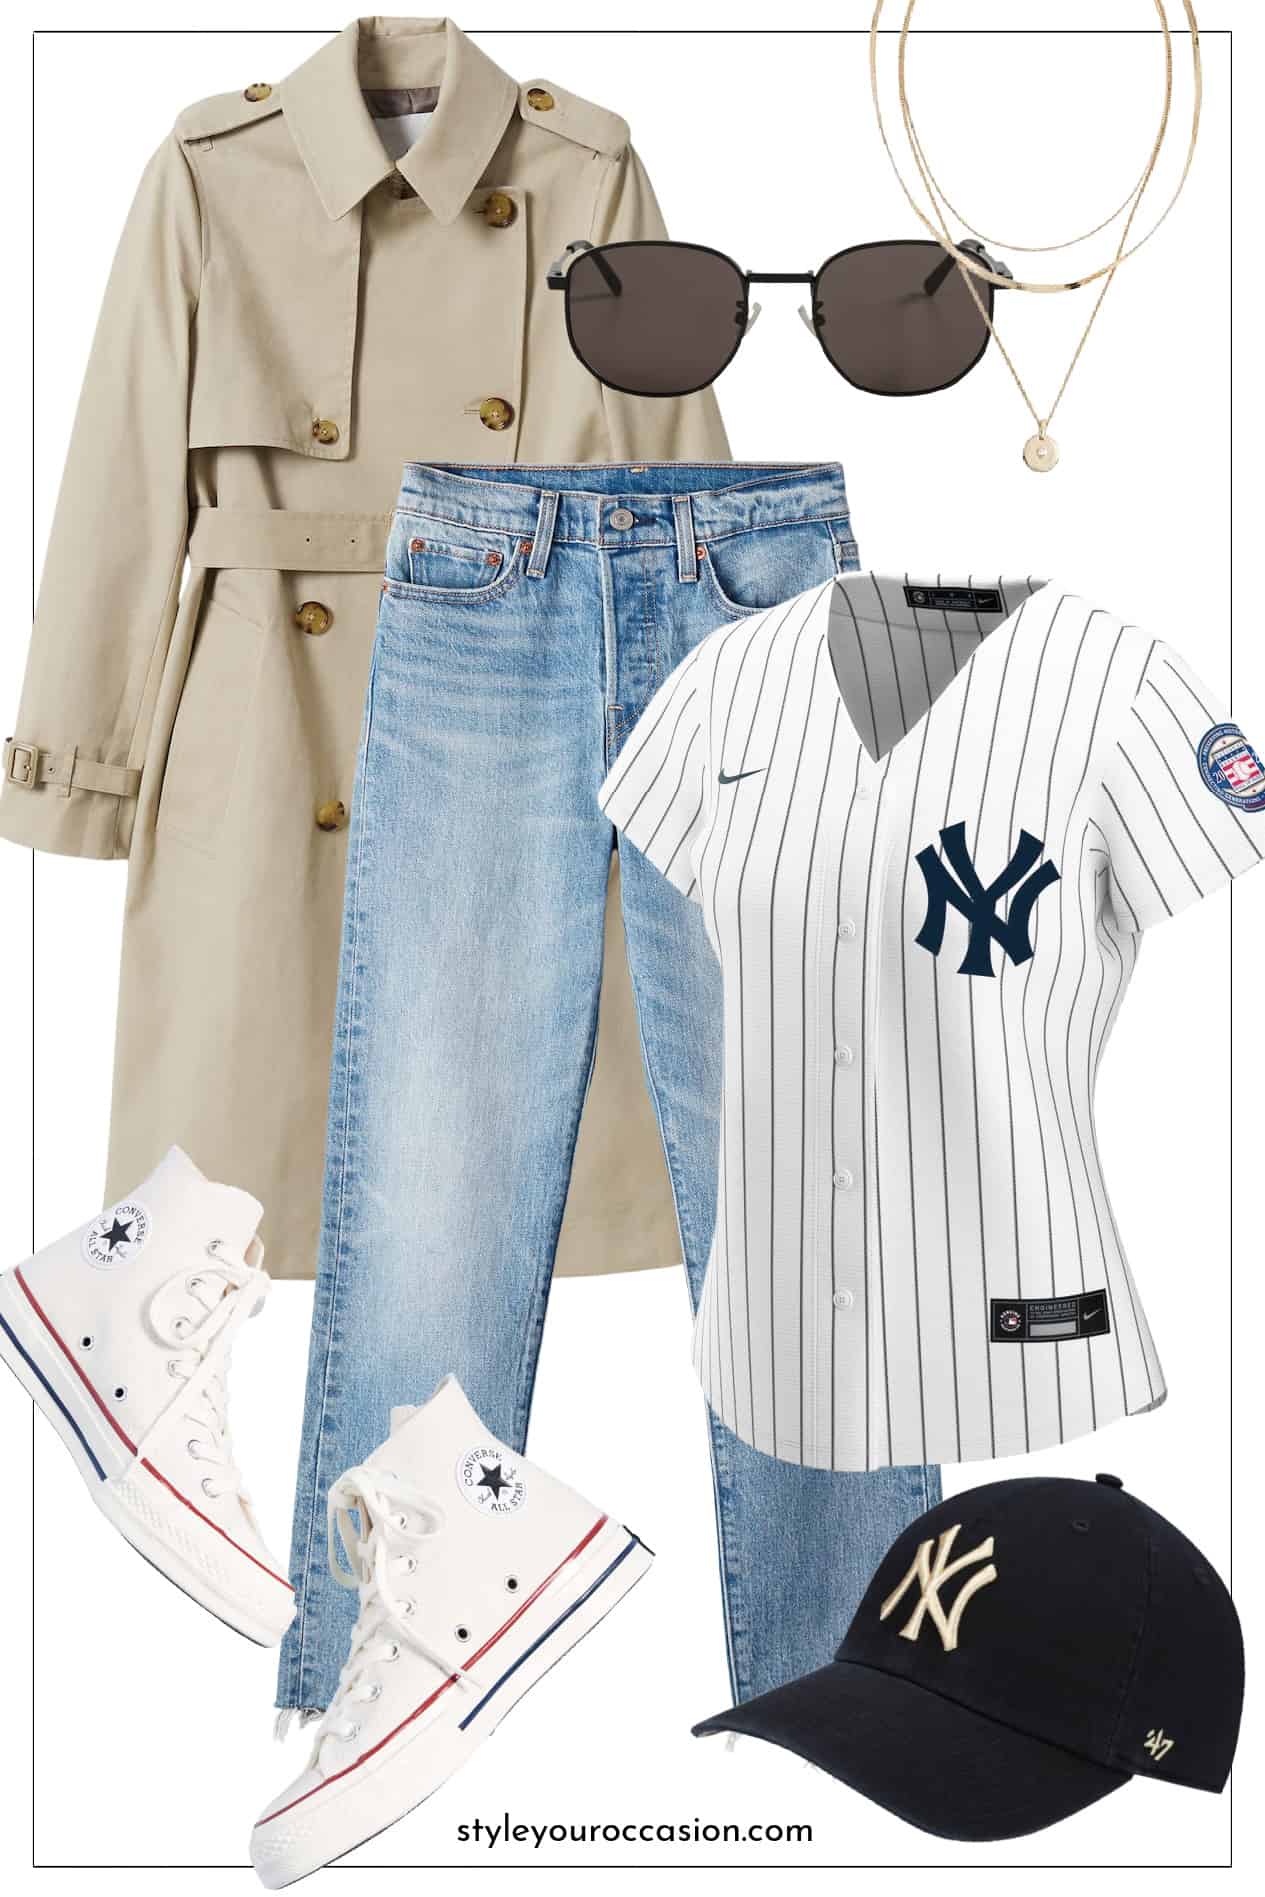 baseball button up jersey outfit